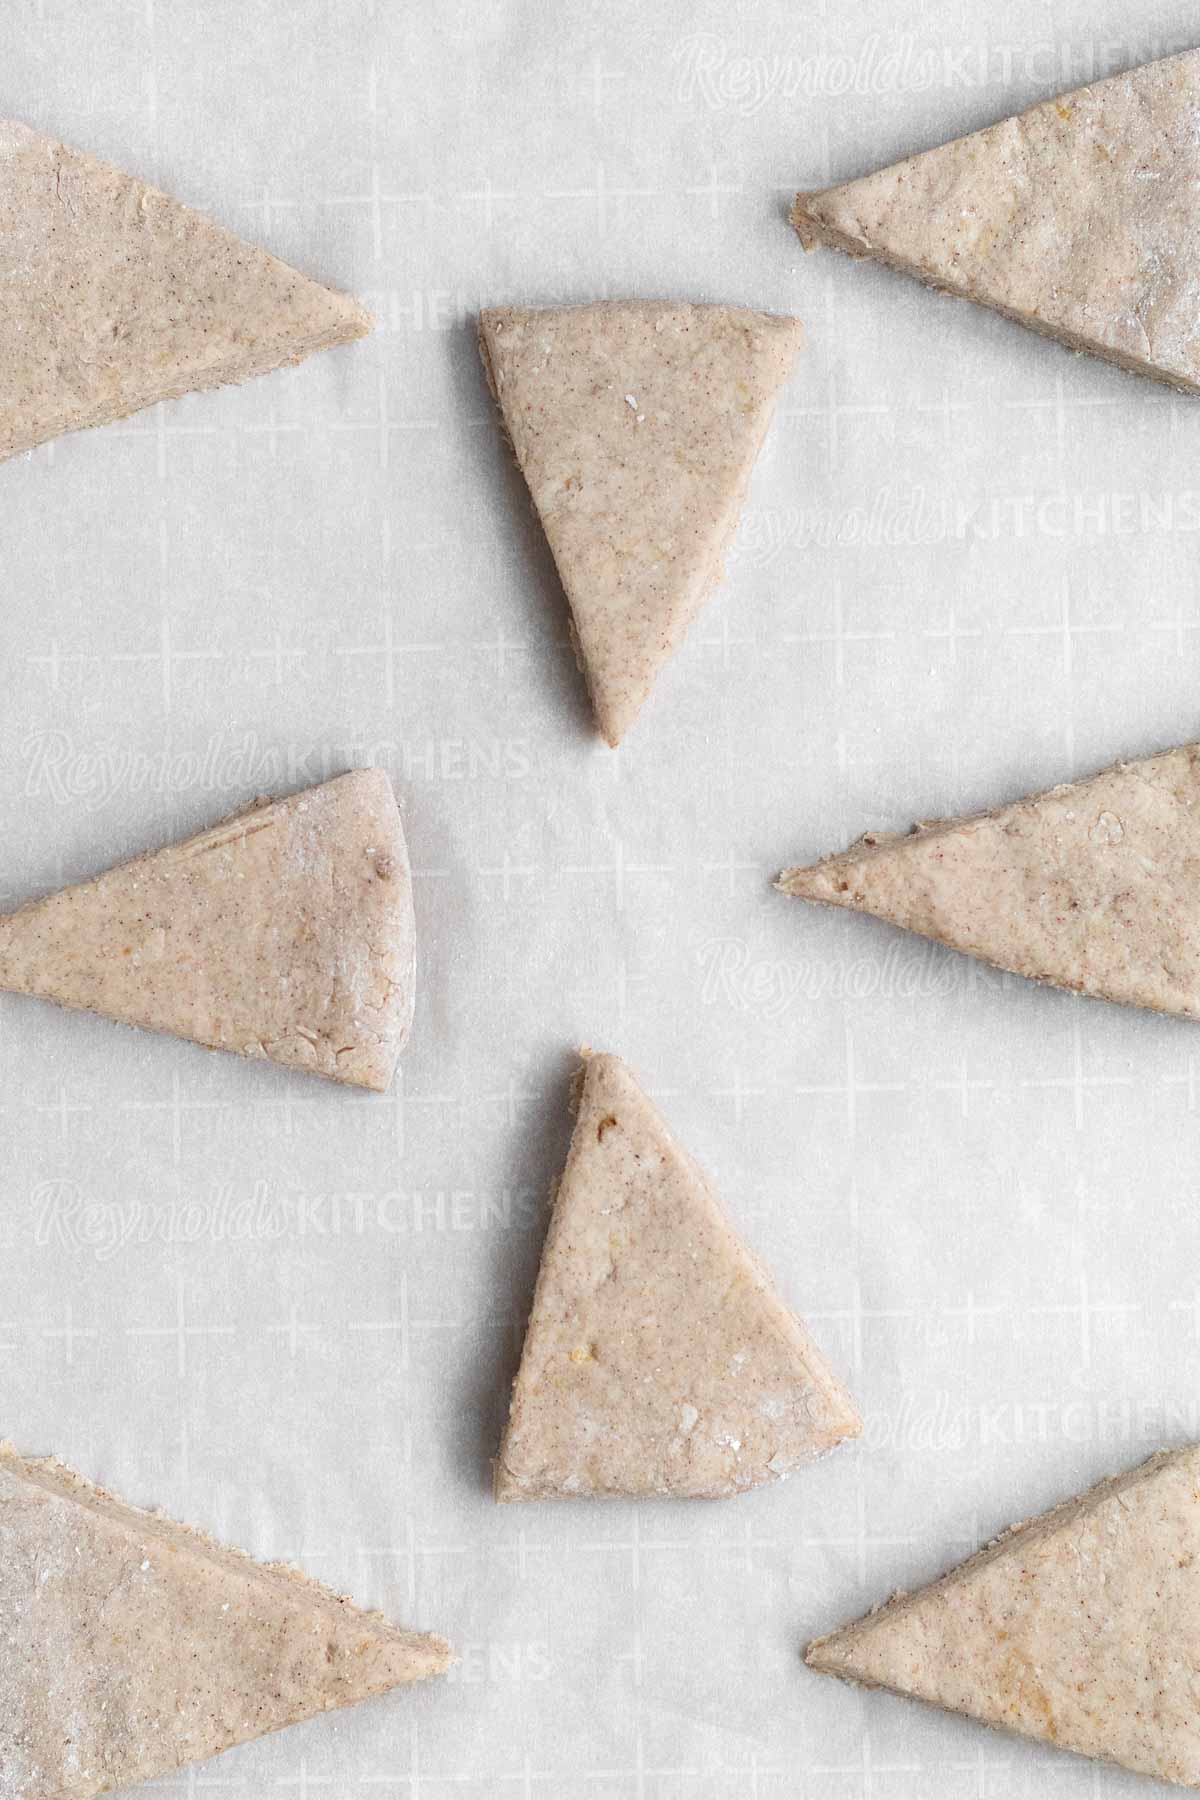 Triangular wedges spaced out on parchment paper.